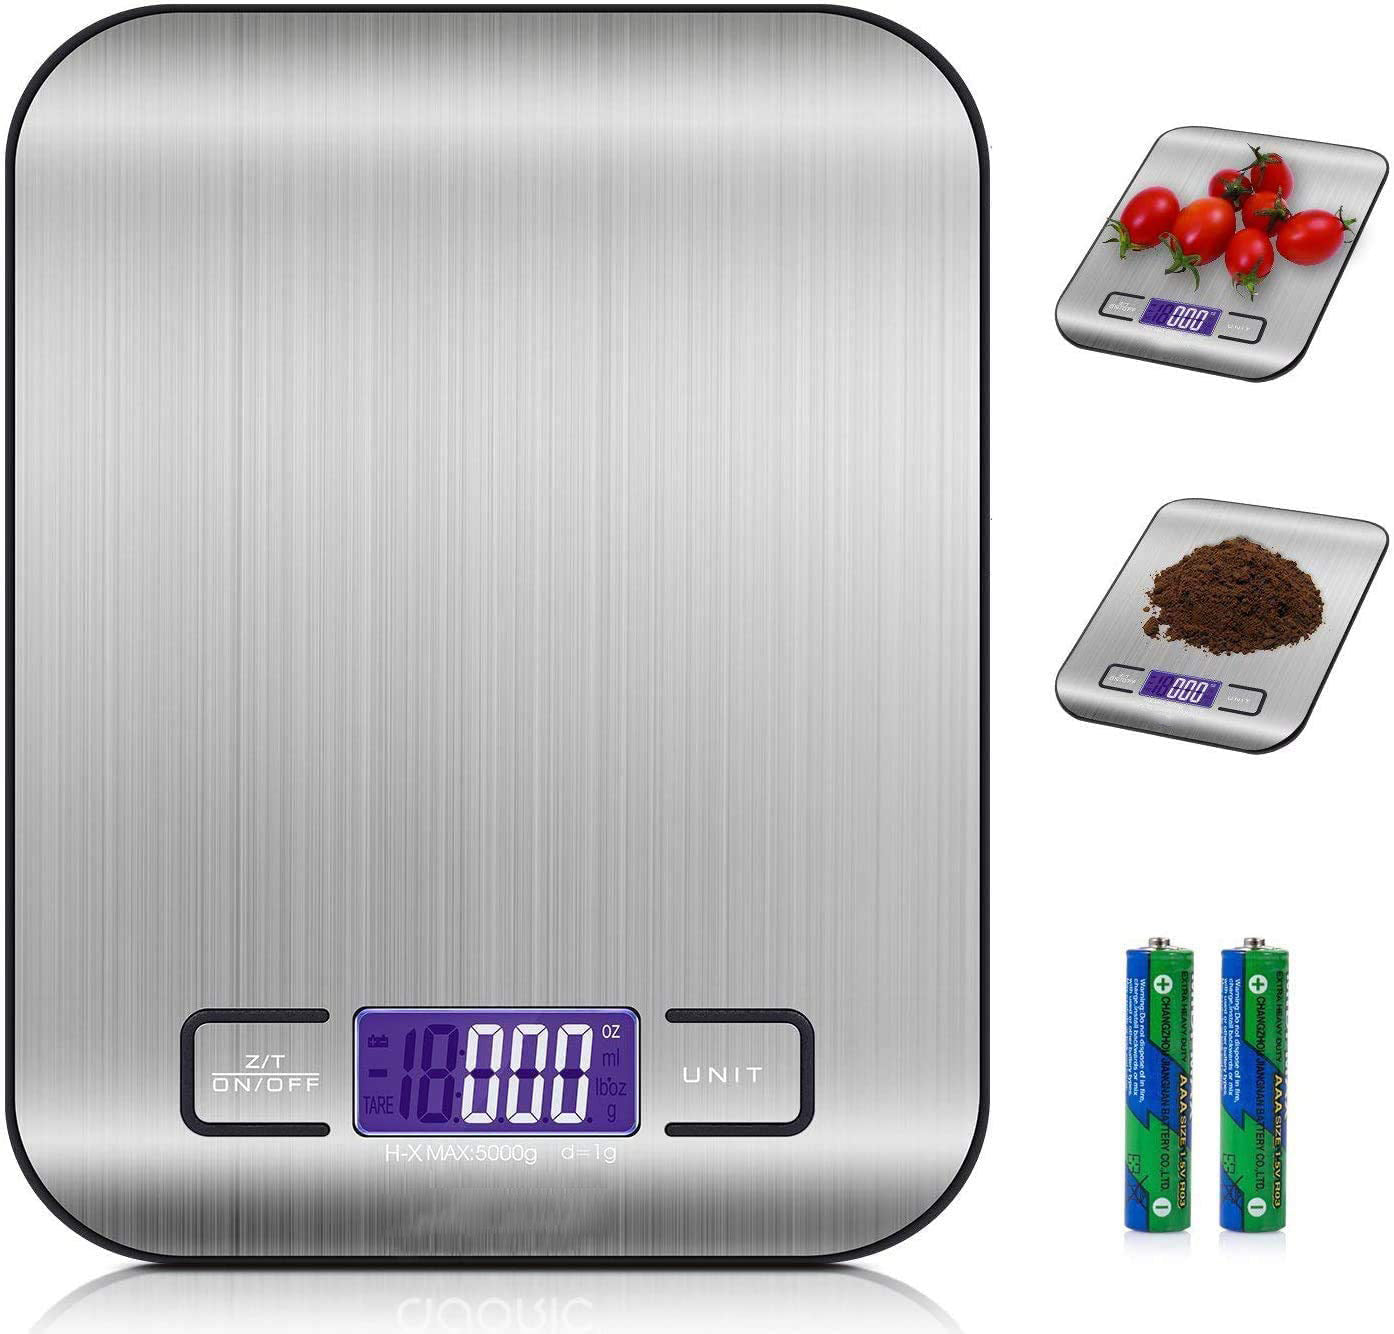 SKONYON Digital Kitchen Scale Food Scale, 11 lb/5 kg Stainless Steel LCD Display Tare Function Automatic Shutdown, Silver